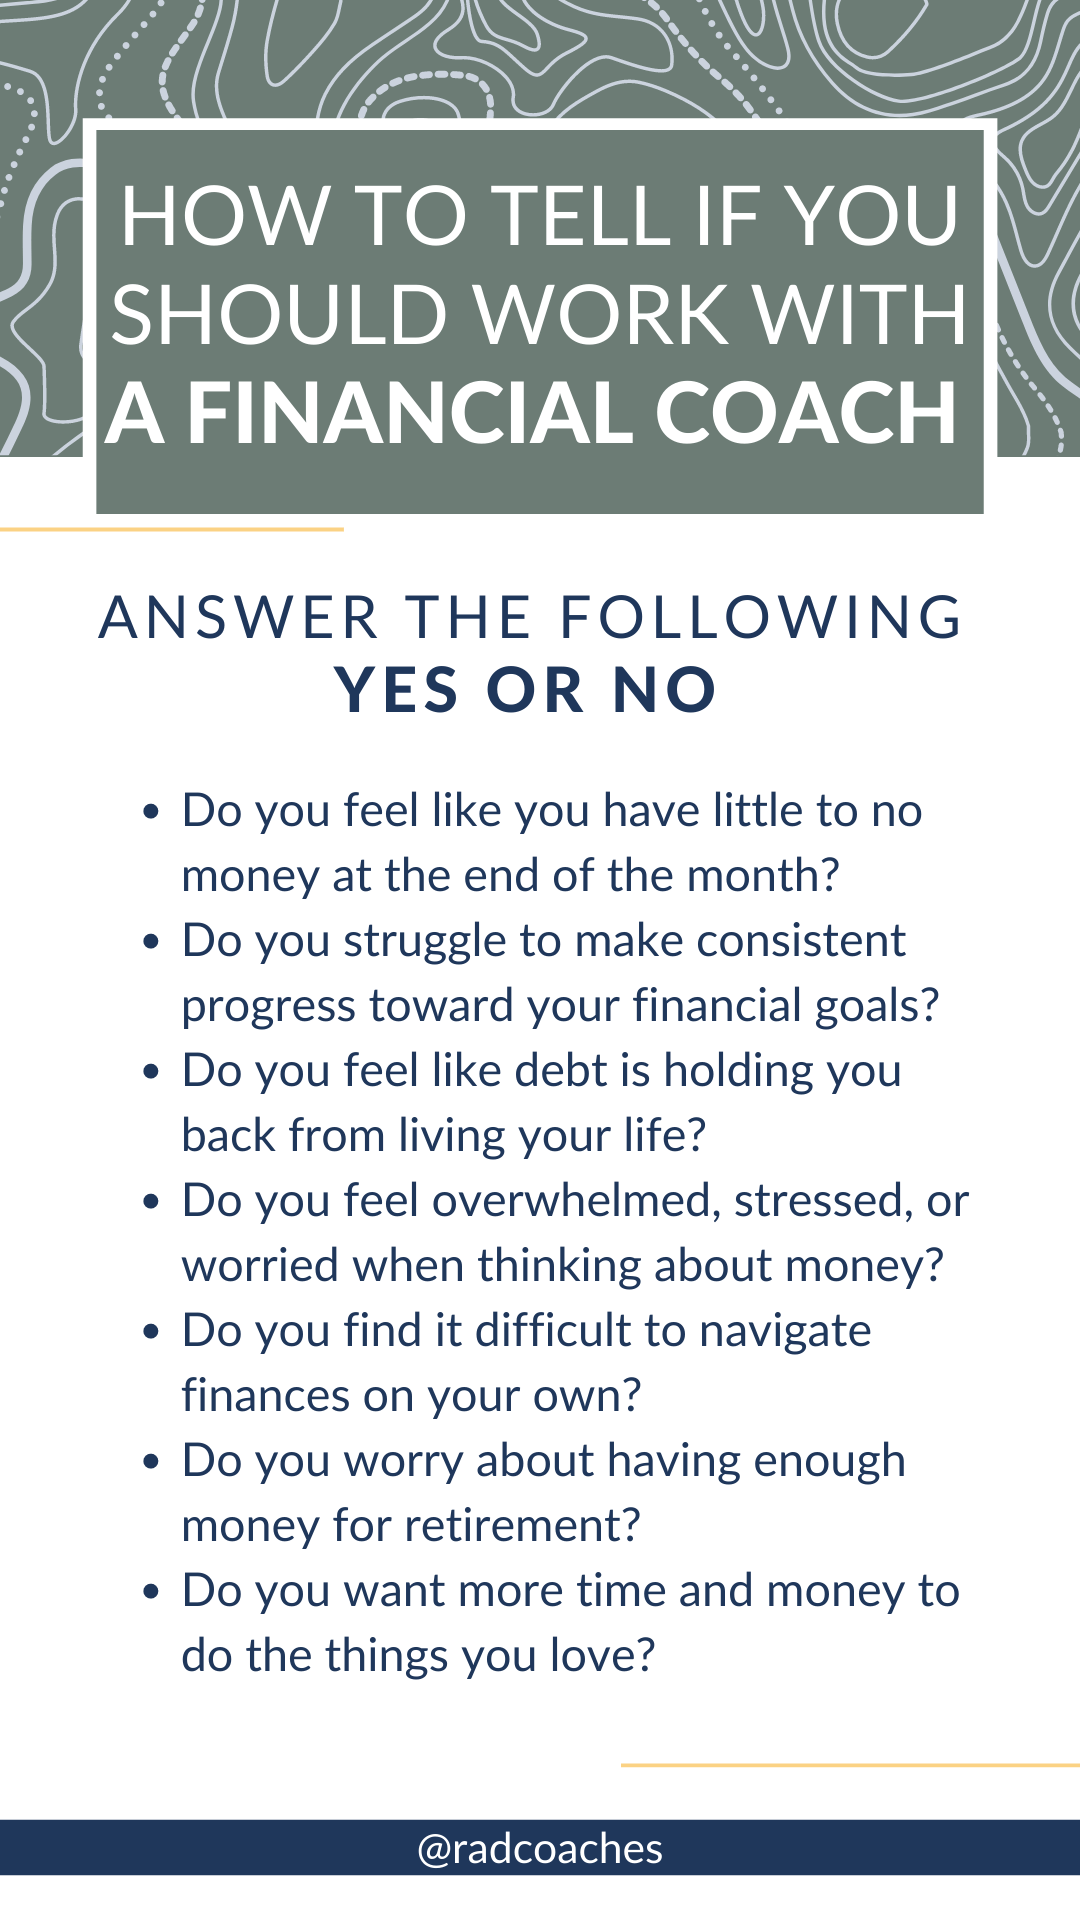 Graphic with a personal quiz to help you decide if you should work with a financial coach.